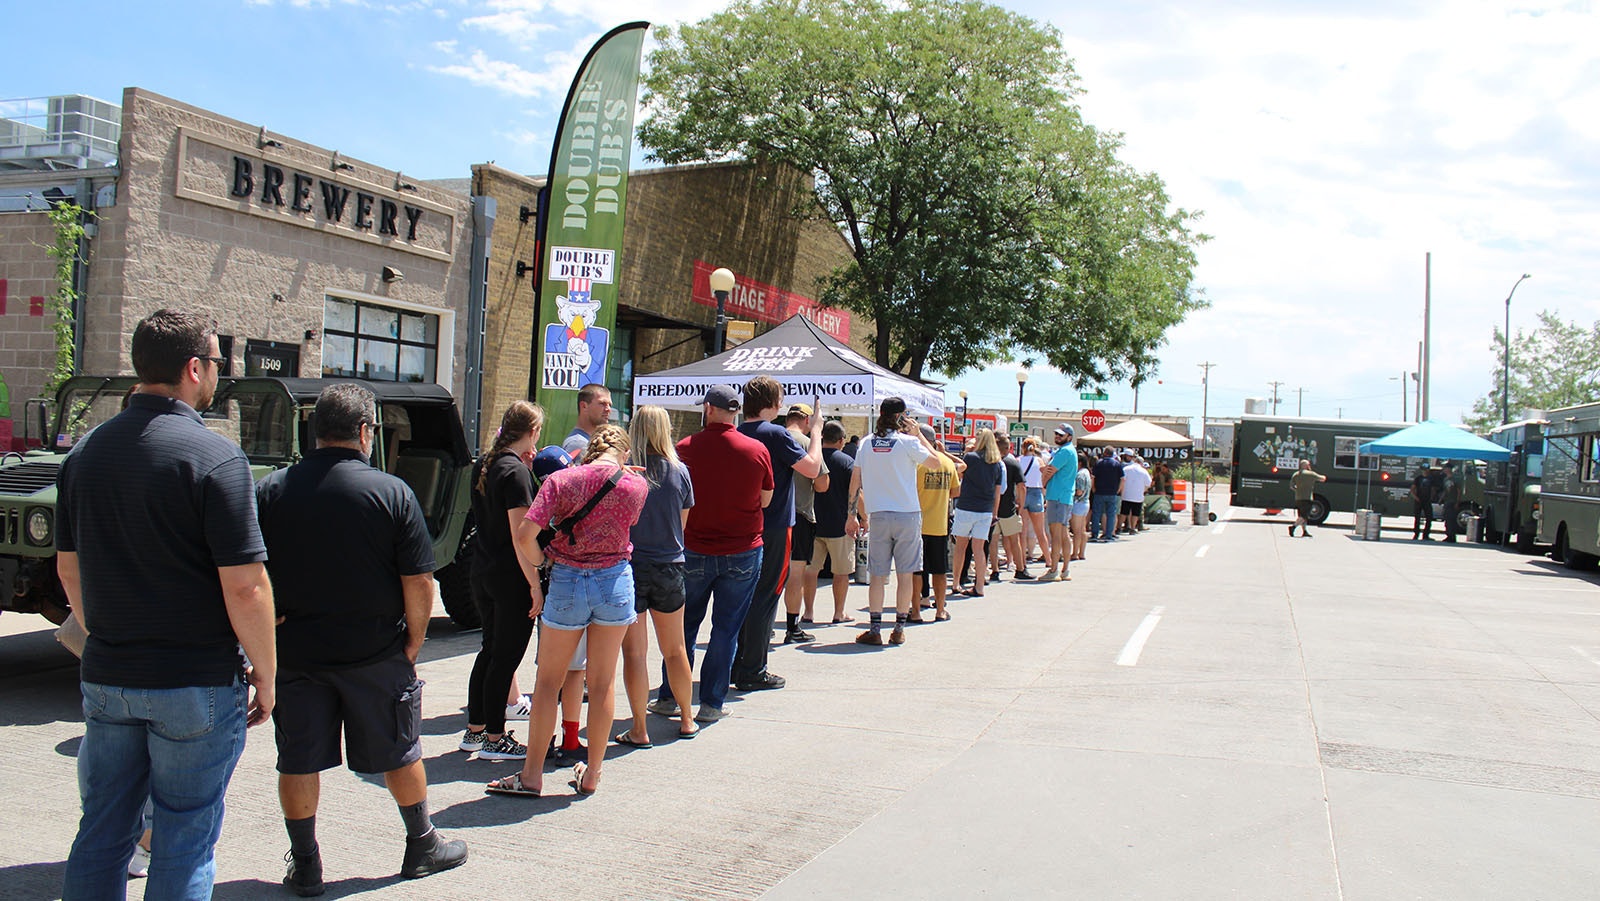 A long line of people wait for buffalo wings as Weitzel's Wings begins its world-record attempt at Freedom's Edge Brewing Co. in downtown Cheyenne on Friday afternoon.